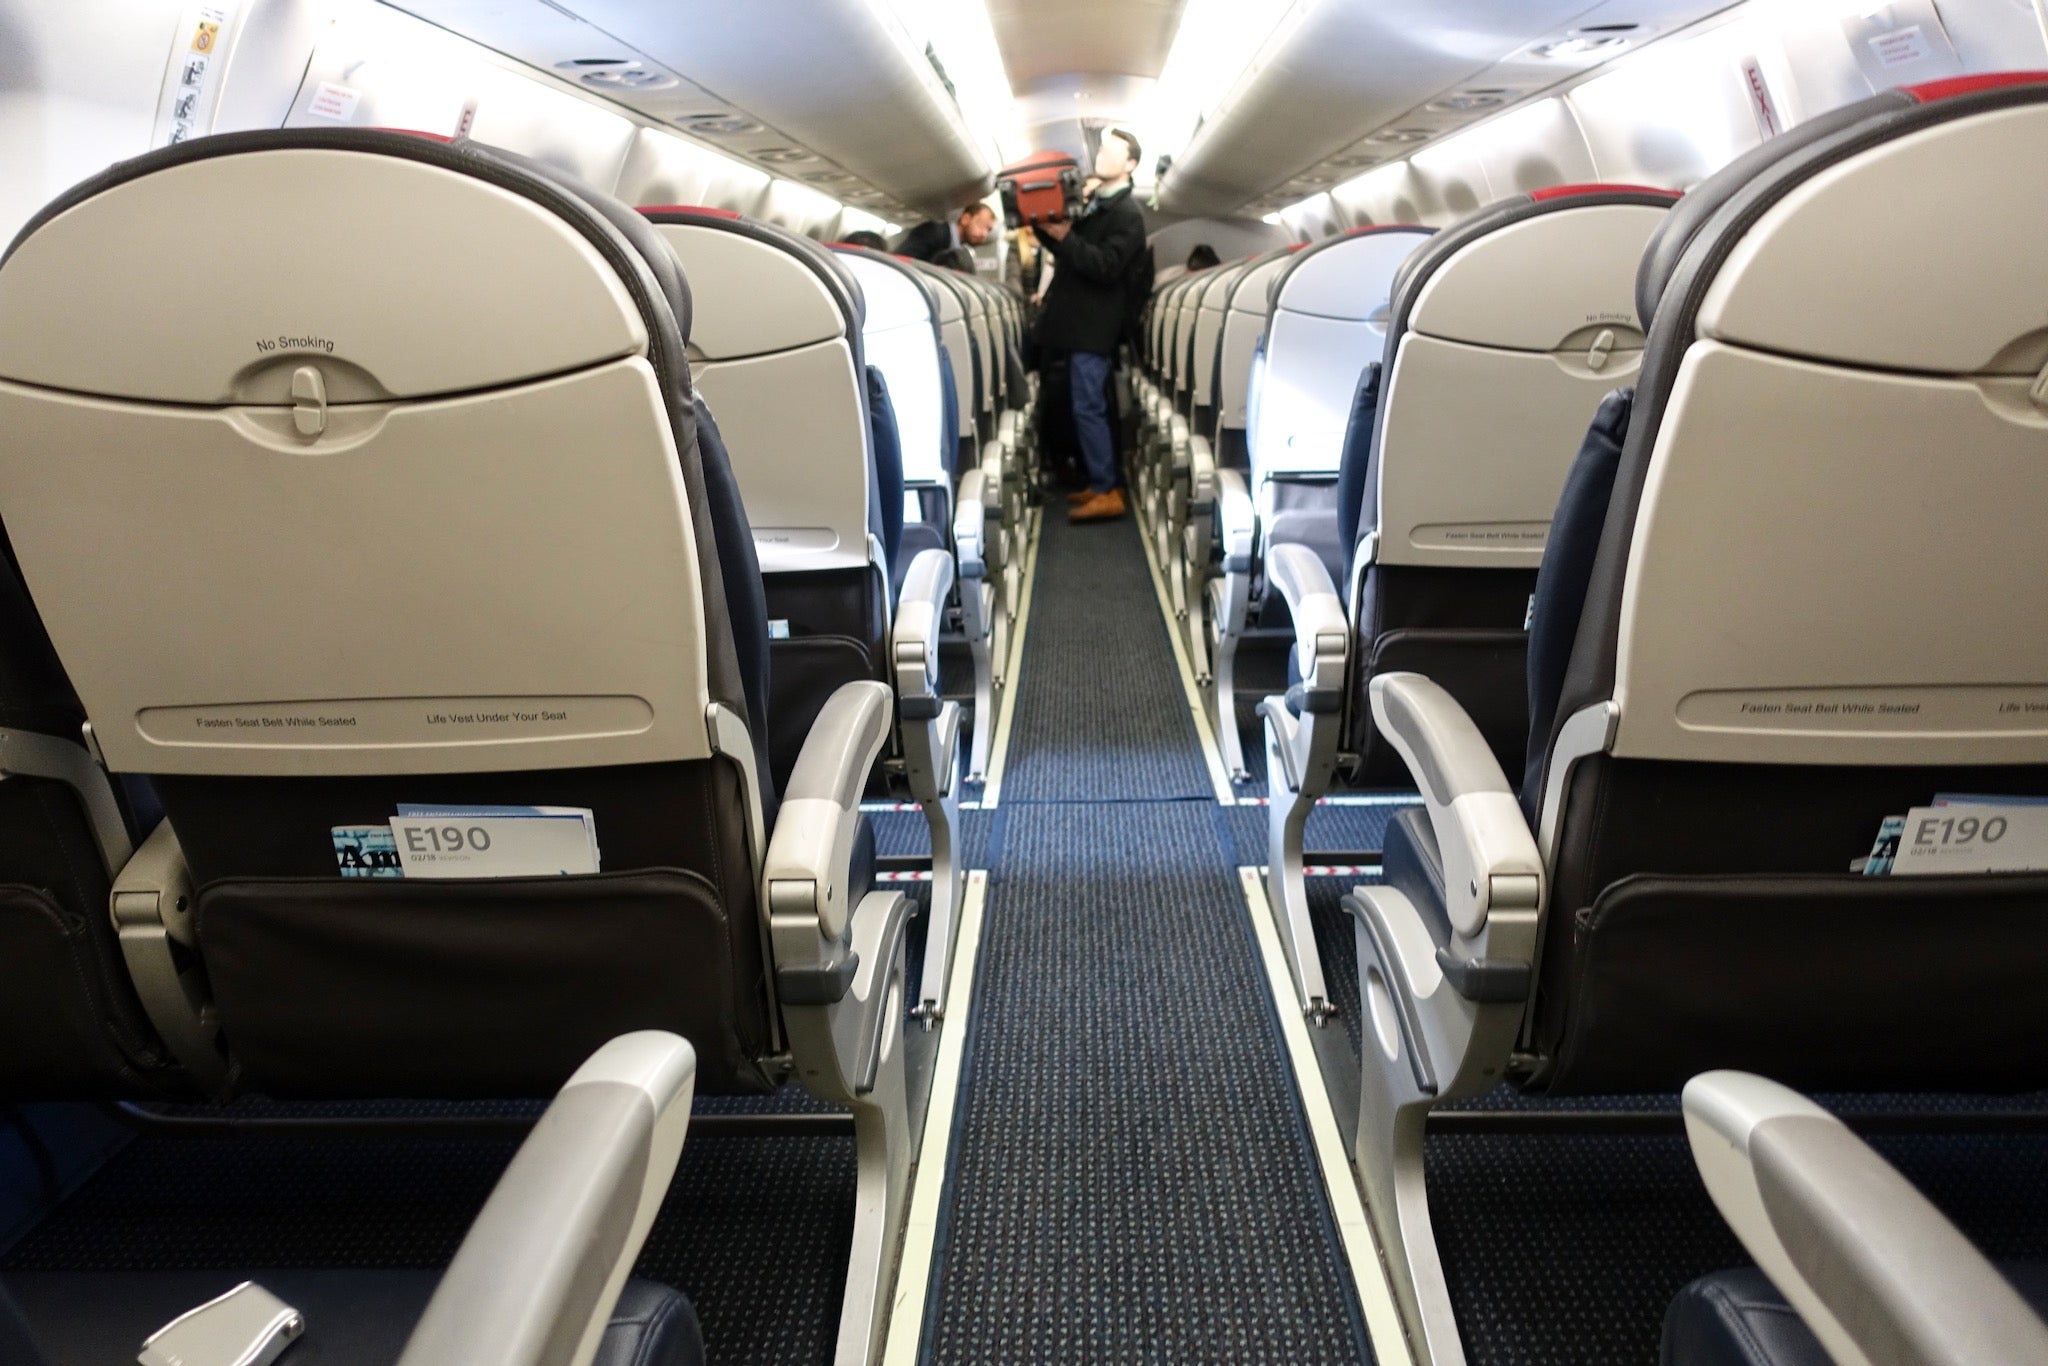 Better Than the Acela: A Review of AA's Shuttle Service on the ERJ 